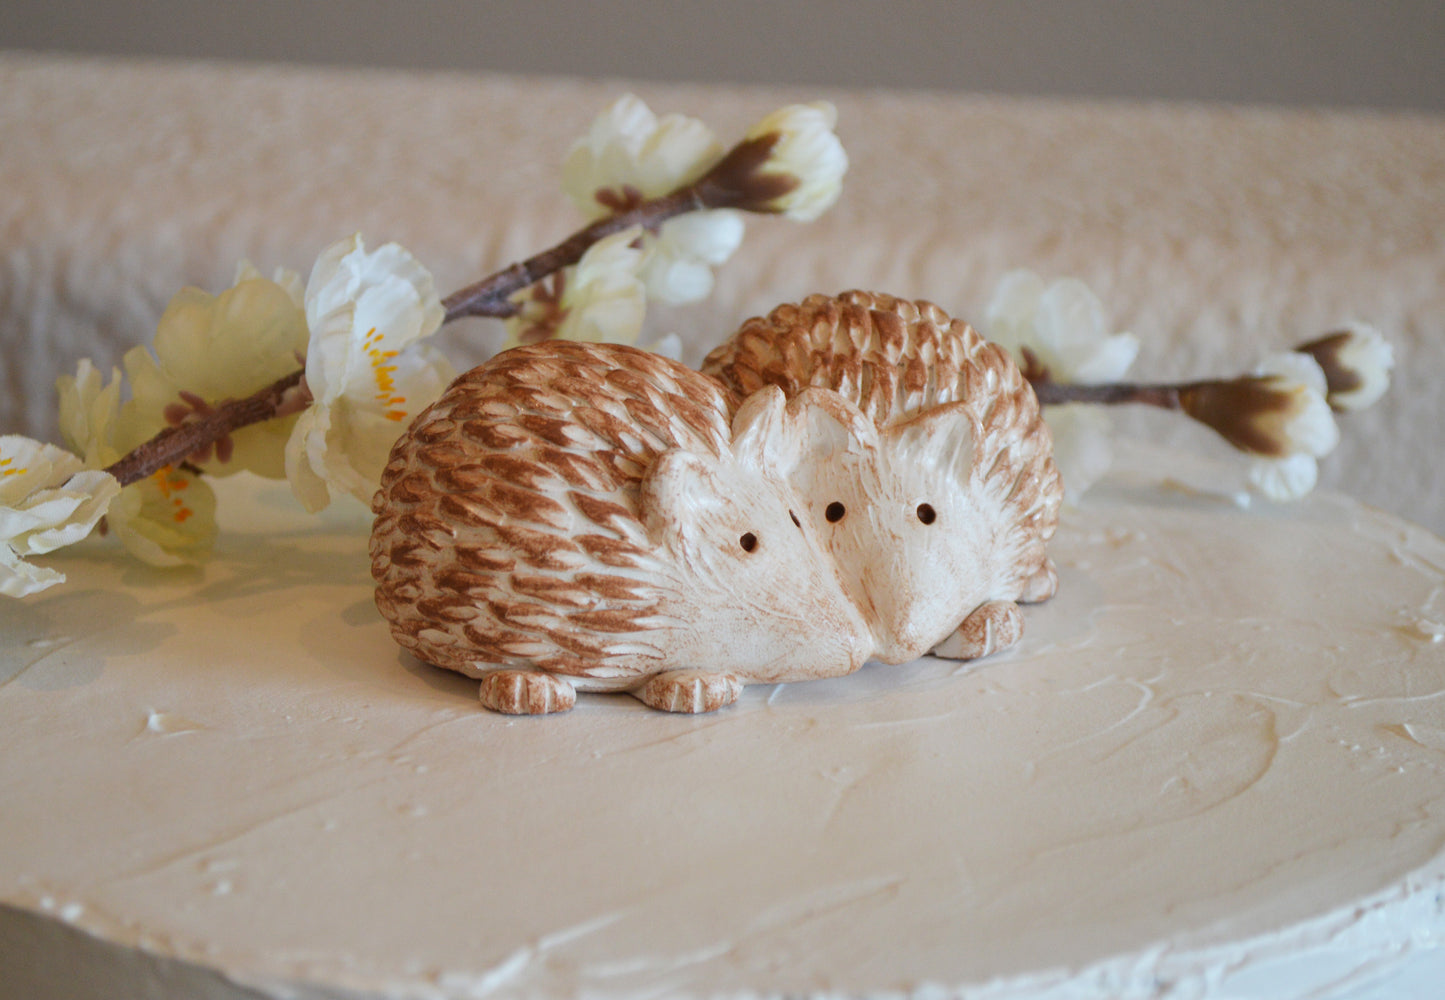 Hedgehogs snuggling wedding cake topper / bride groom / personalized with your initials / custom bespoke wedding anniversary gift